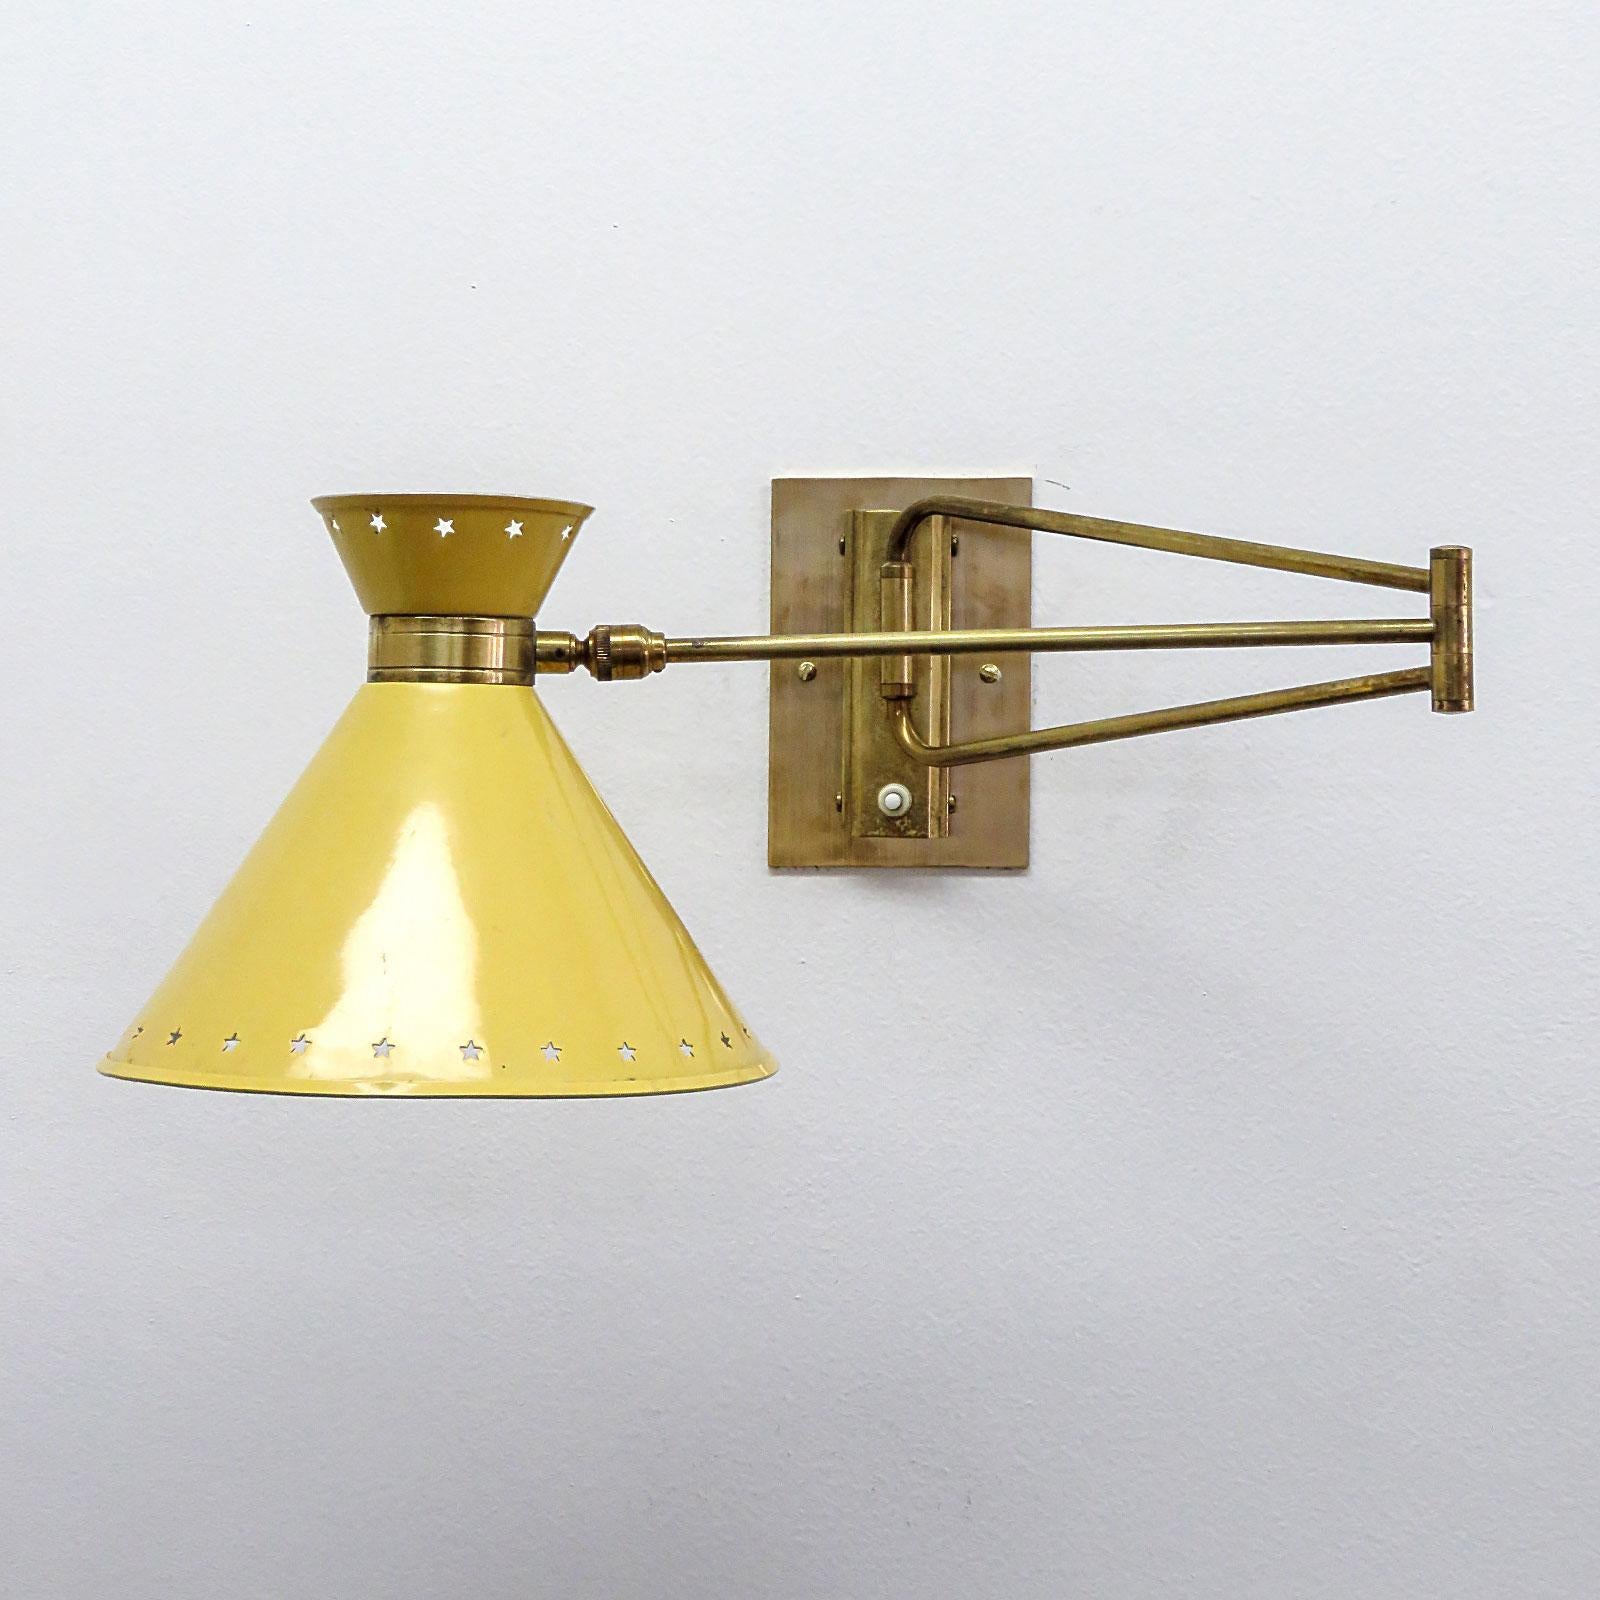 French Swing Arm Wall Light by Rene Mathieu for Lunel, 1950 For Sale